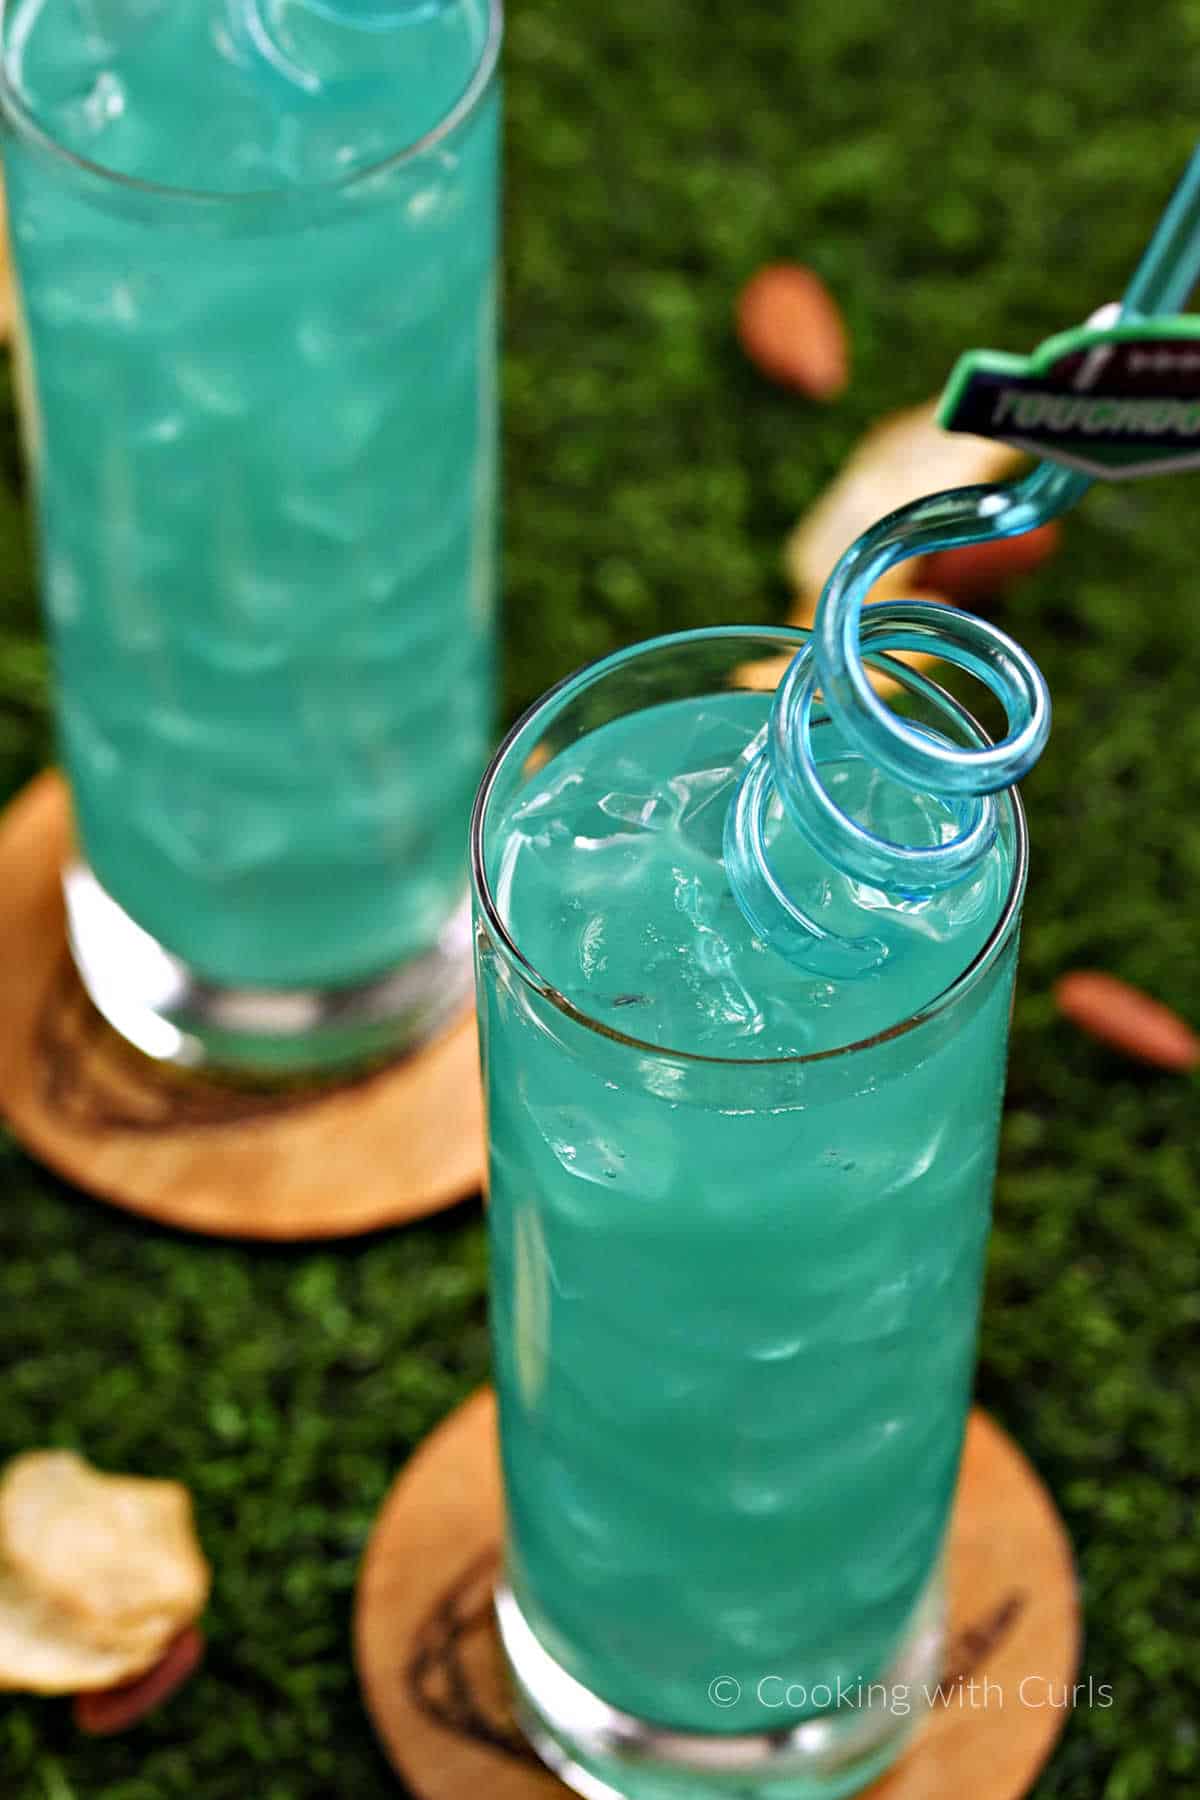 Looking down into a teal green Philadelphia eagles cocktail with spiral straw.